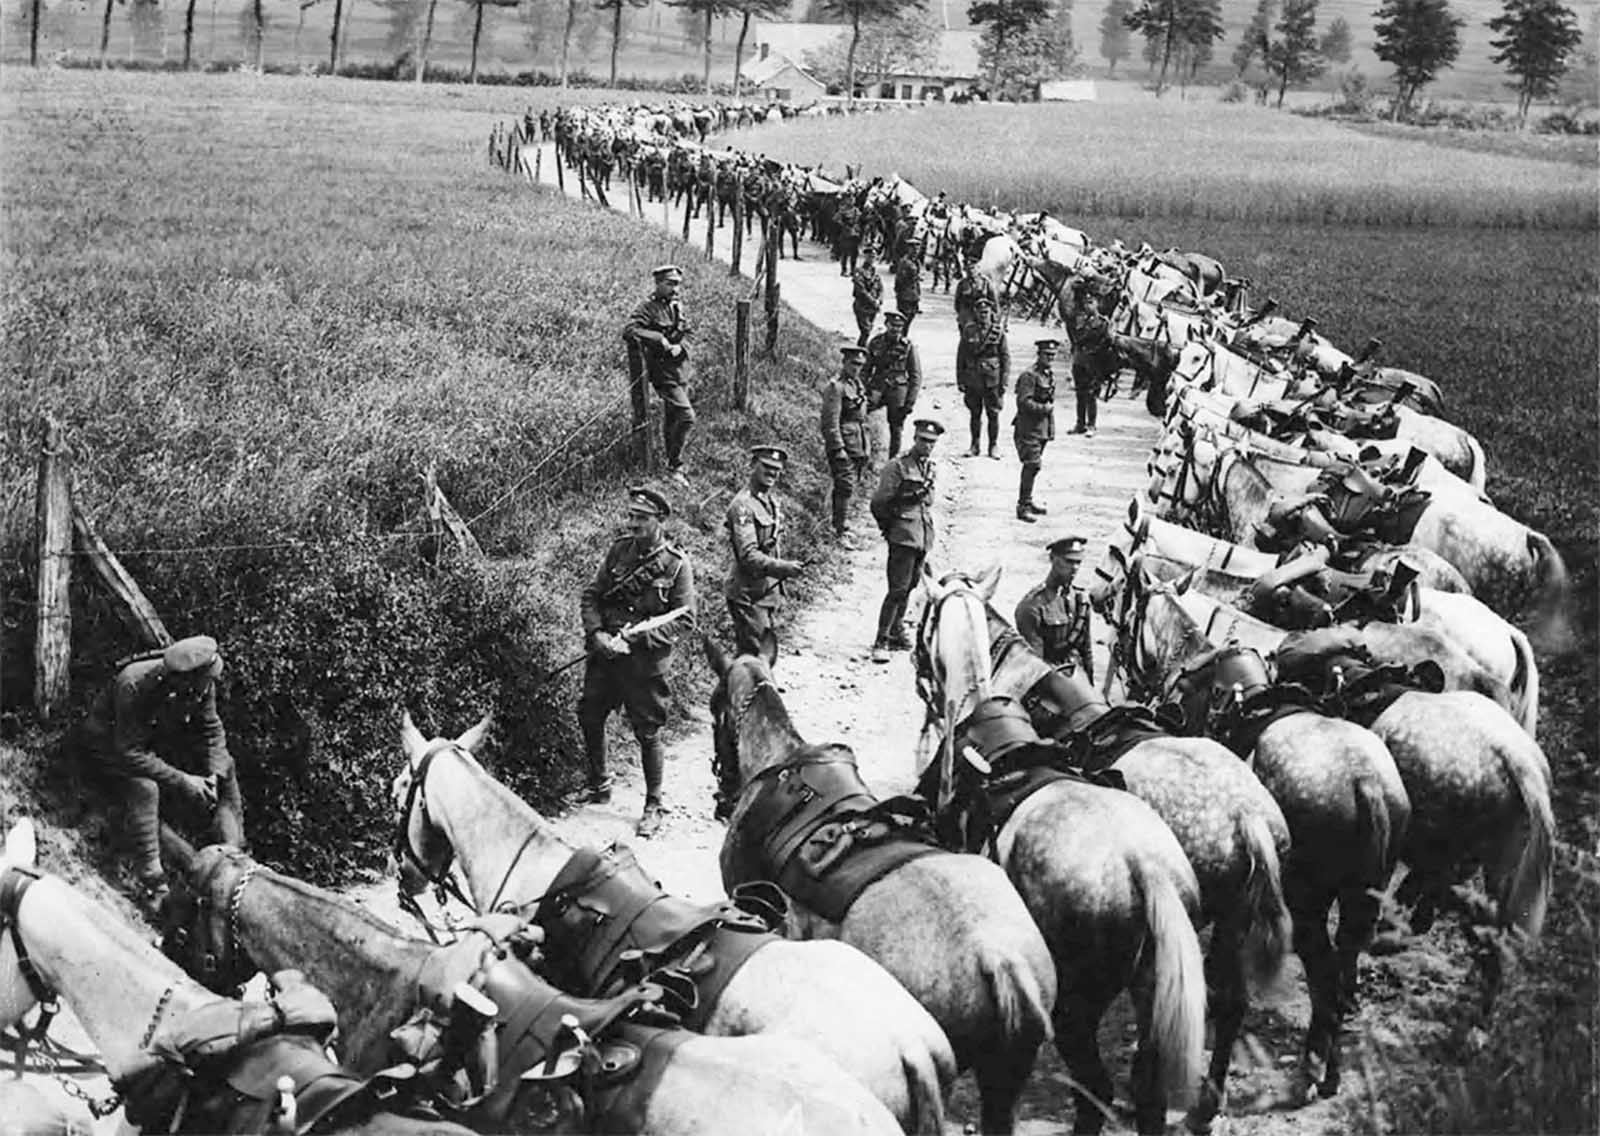 Members of the Royal Scots Greys cavalry regiment rest their horses by the side of the road, in France.